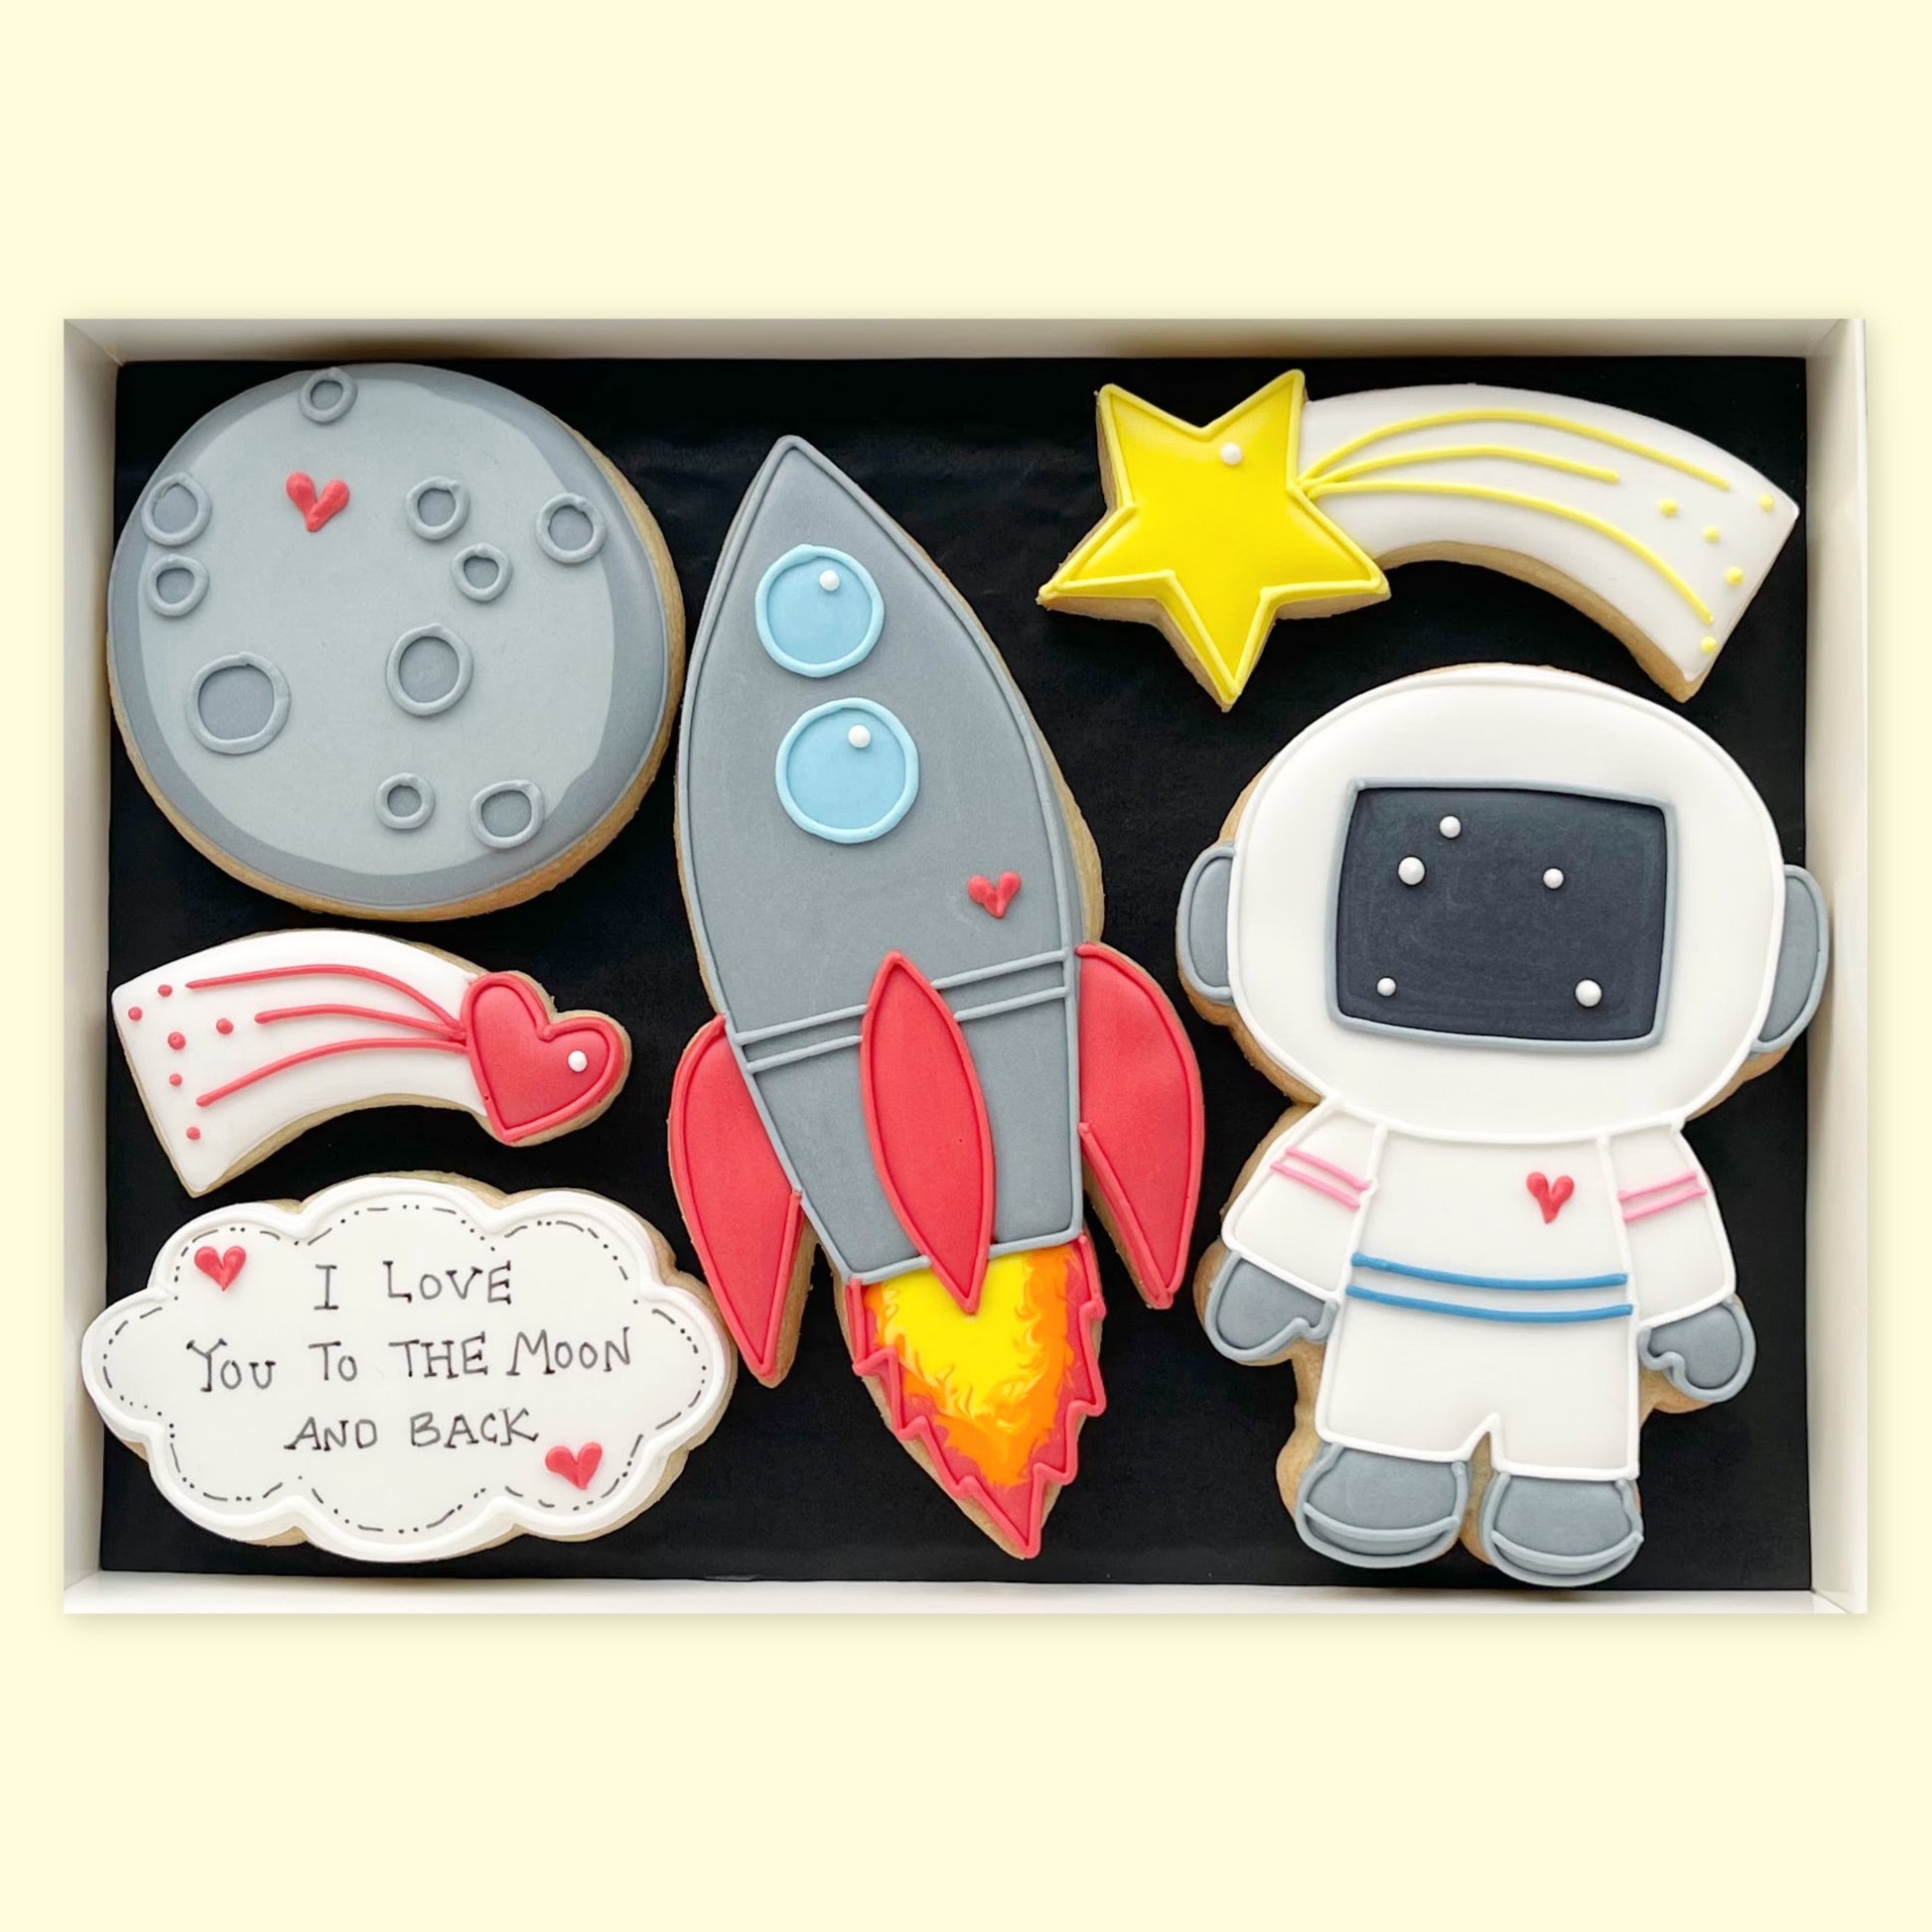 I love you to the moon and back themed hand iced biscuits in an open white gift box by Katie's Biscuit Shop